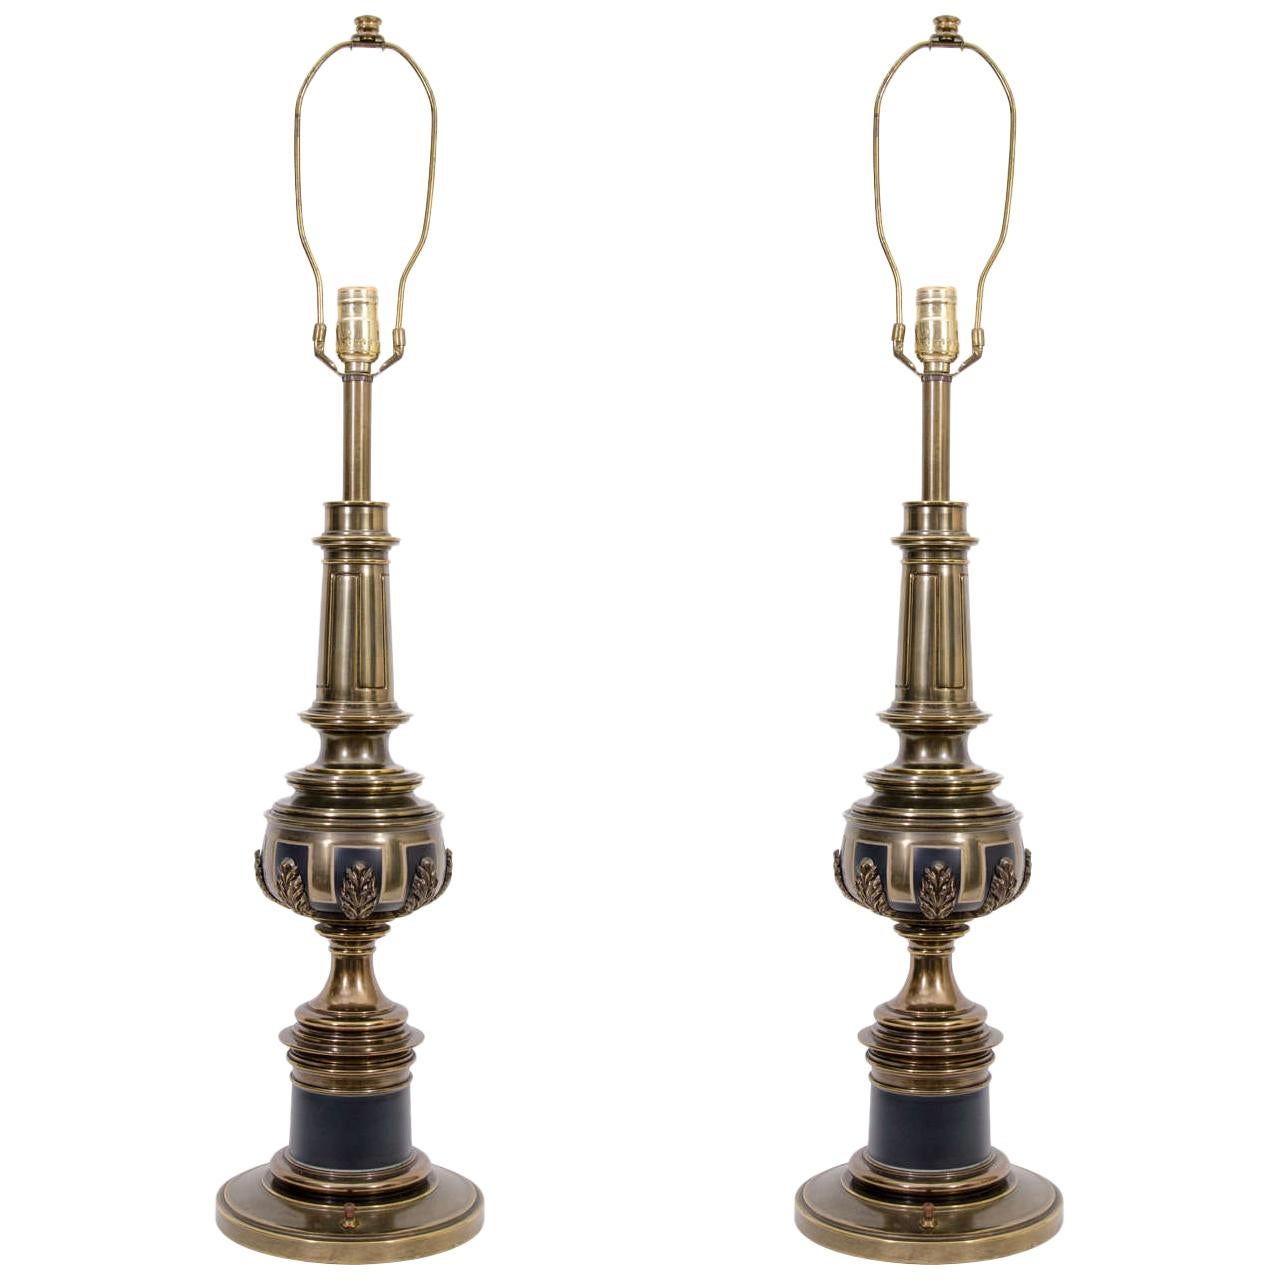 Brass and Black Enamel Table Lamps by Stiffle, Pair